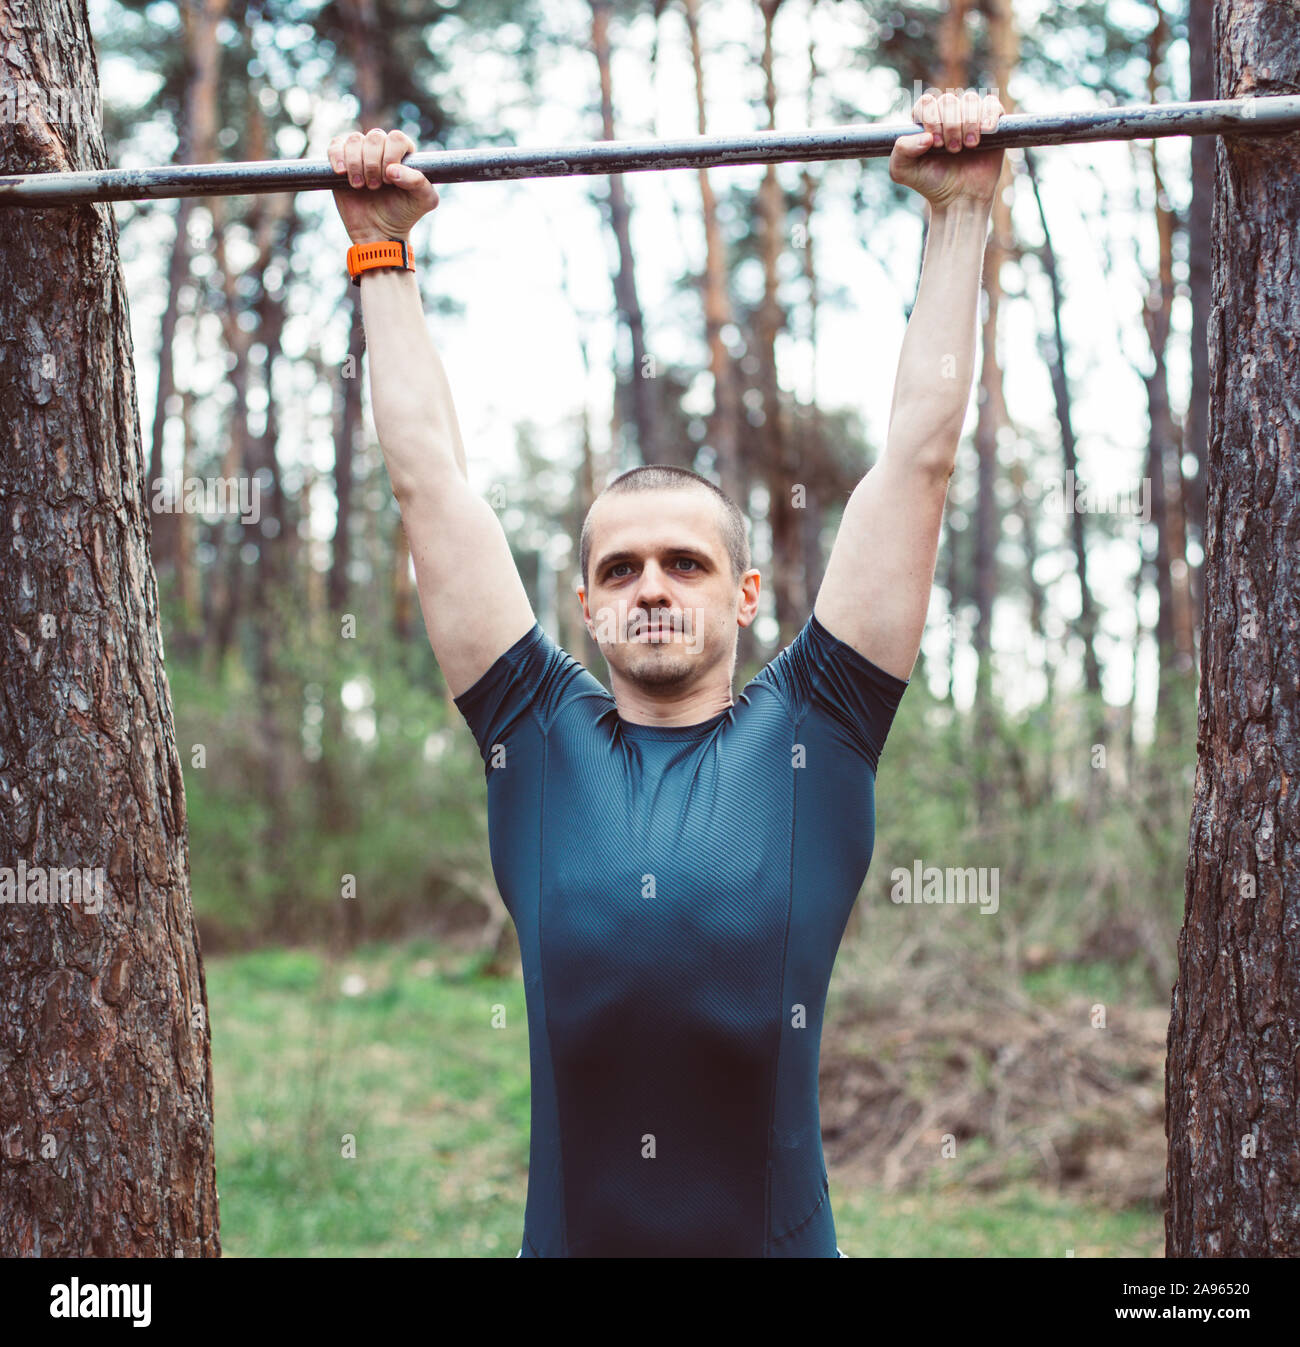 Bodybuilder with Injured Leg Doing Pull Ups. Stock Image - Image of  accident, cross: 116697139